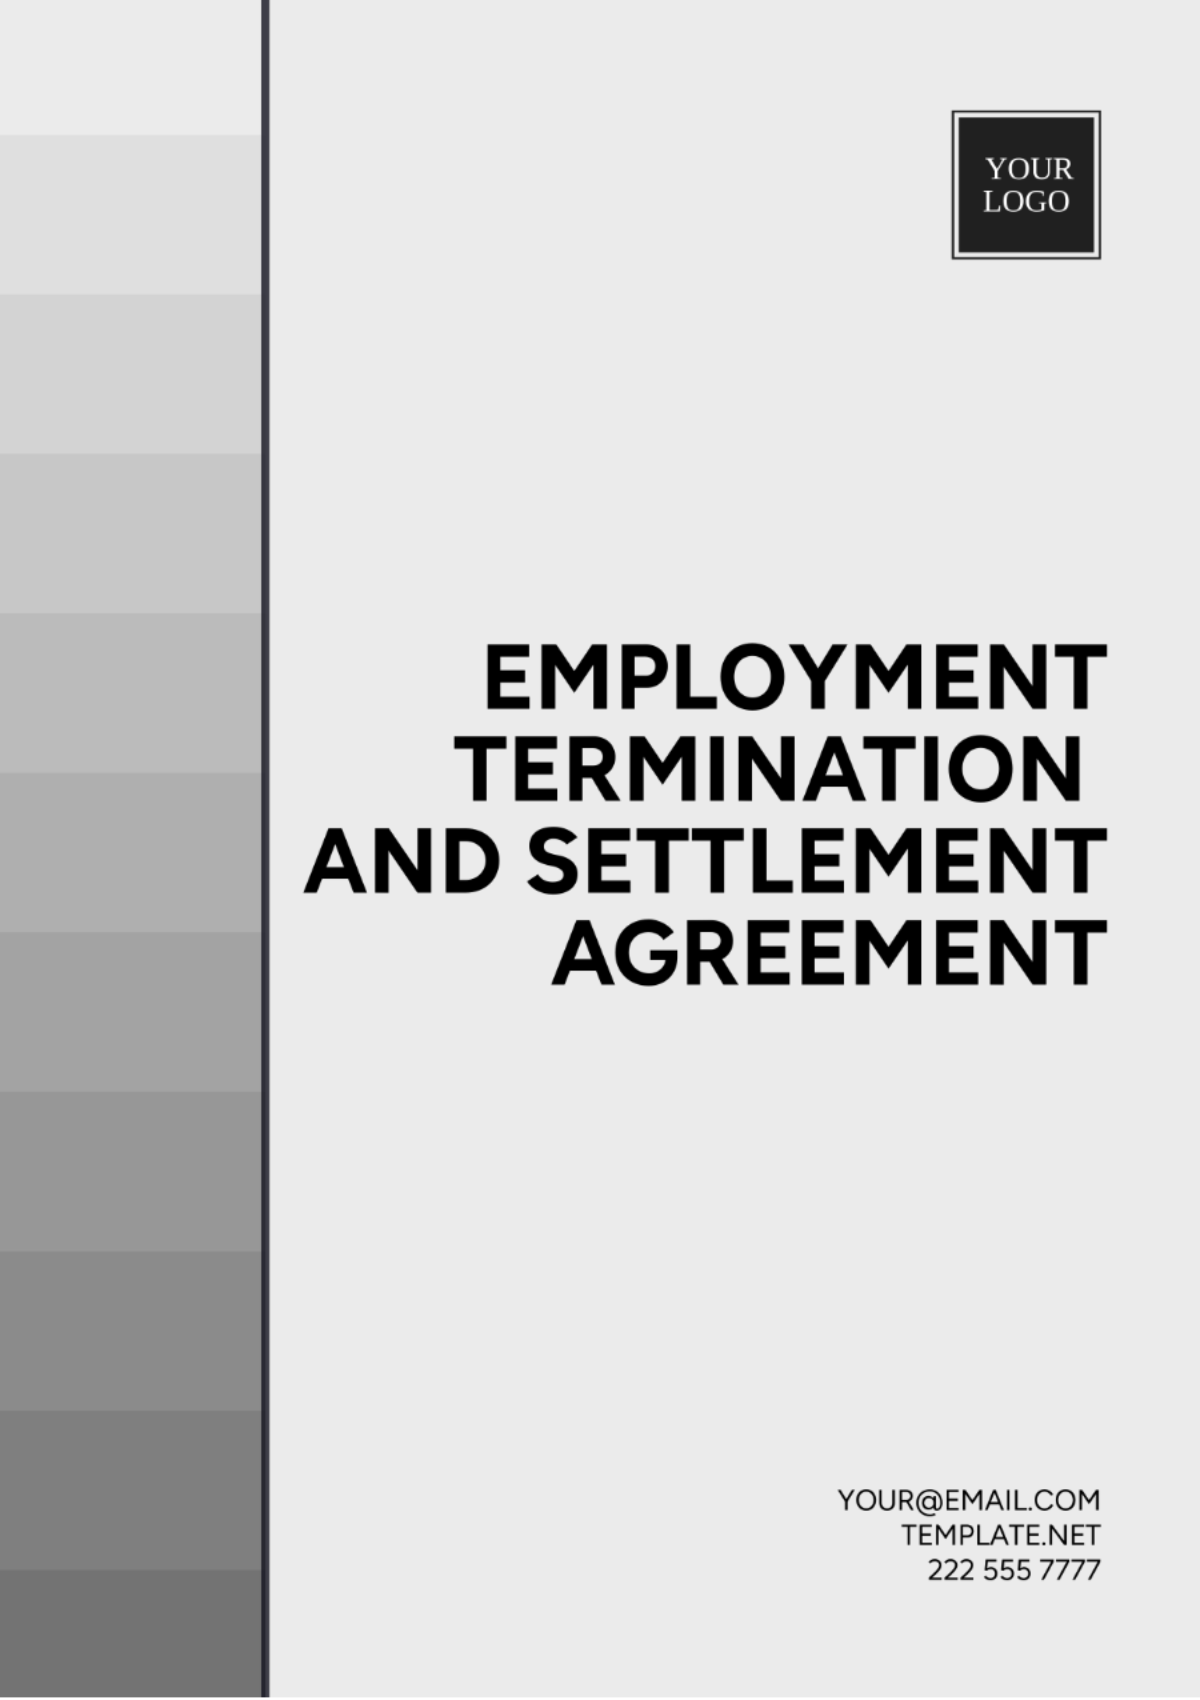 Free Employment Termination and Settlement Agreement Template